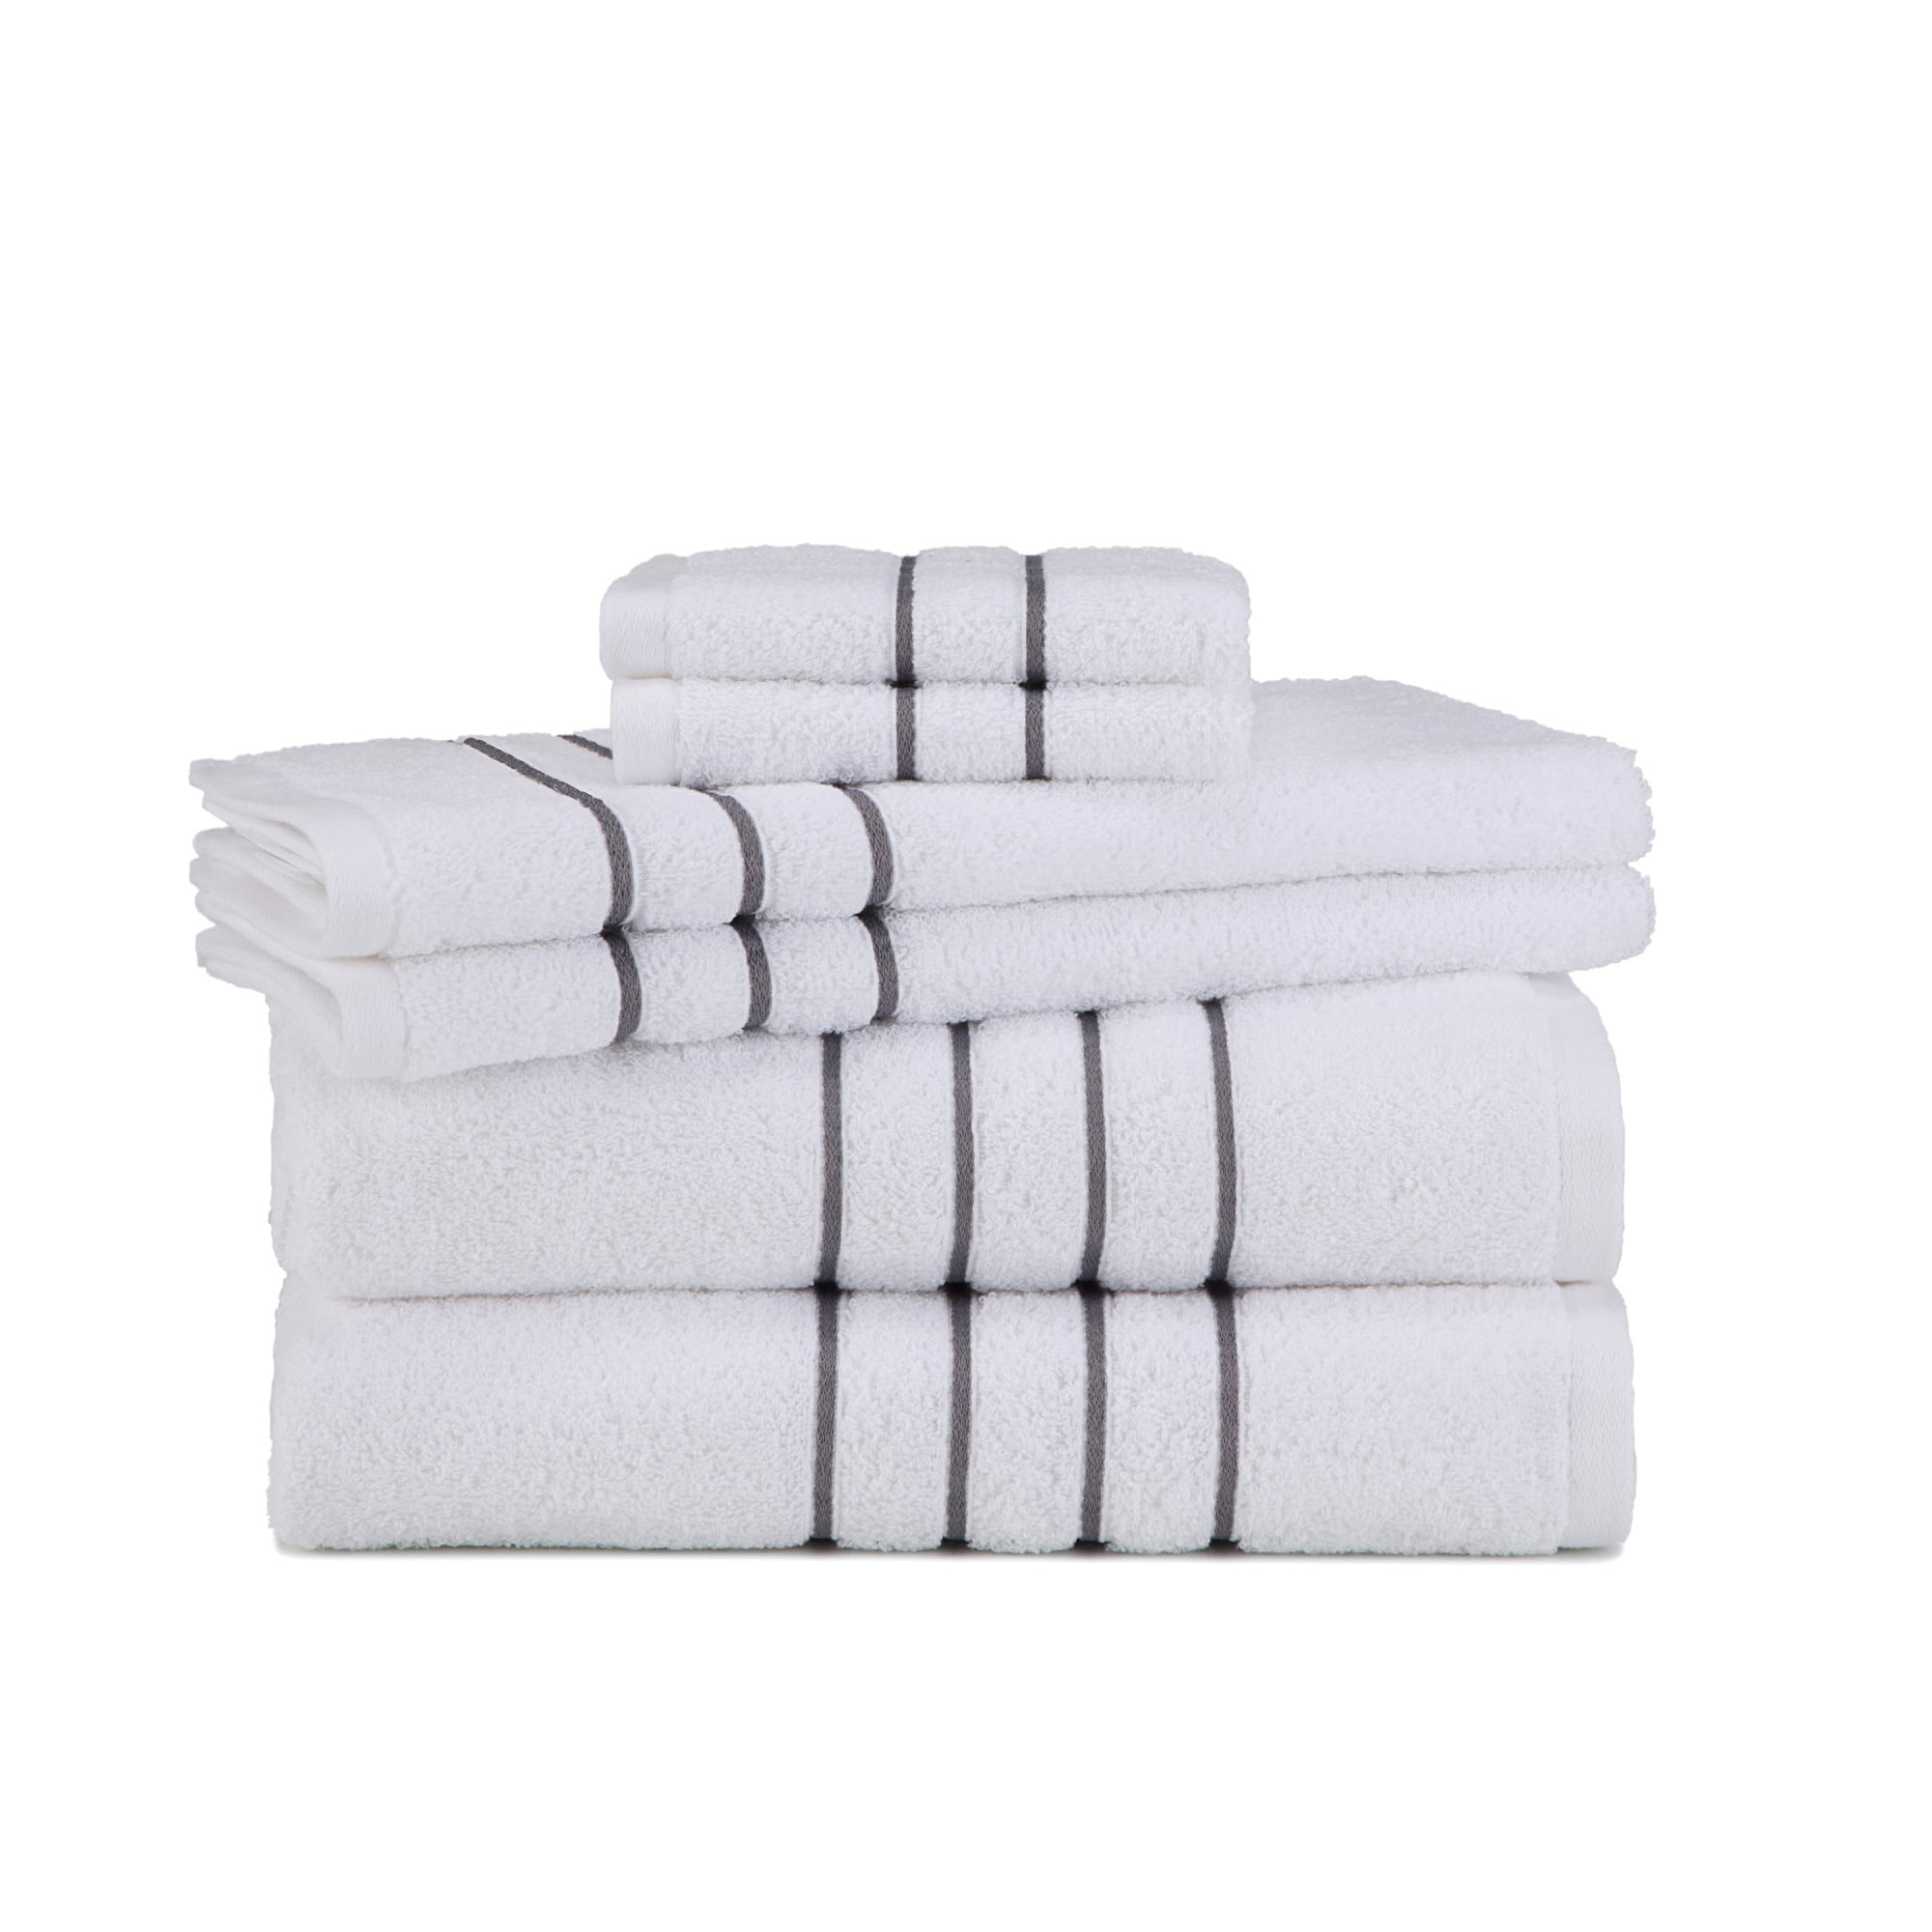 Embroidered Hotel Collection 6-Piece Light Grey Towel Set - Walmart.com